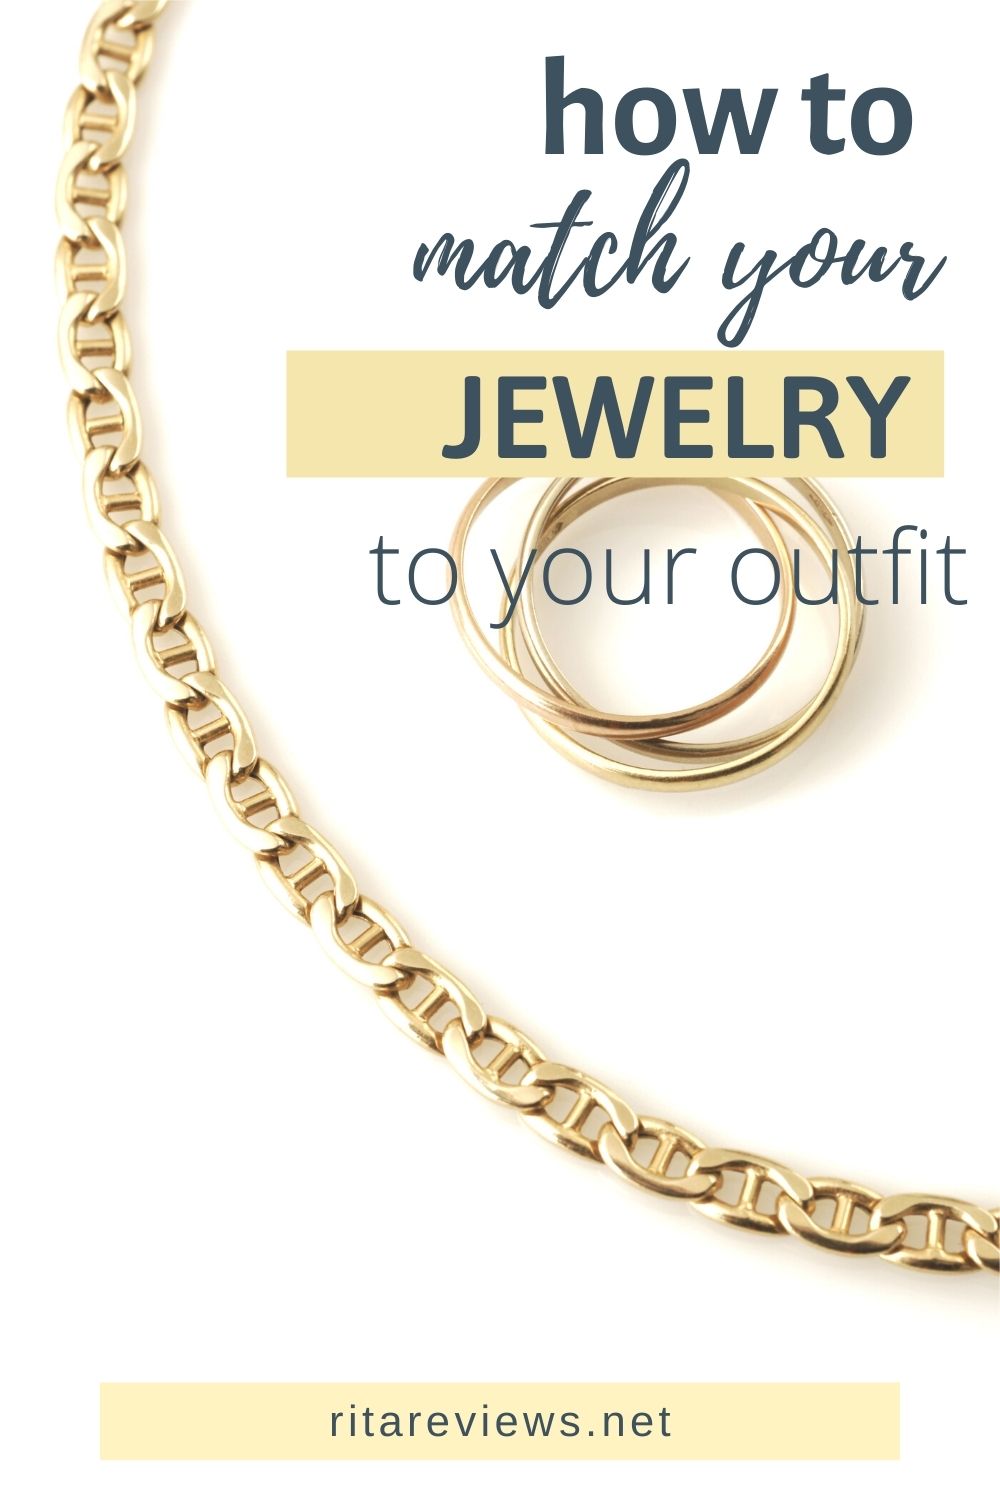 How To Match Your Jewelry To Your Outfit